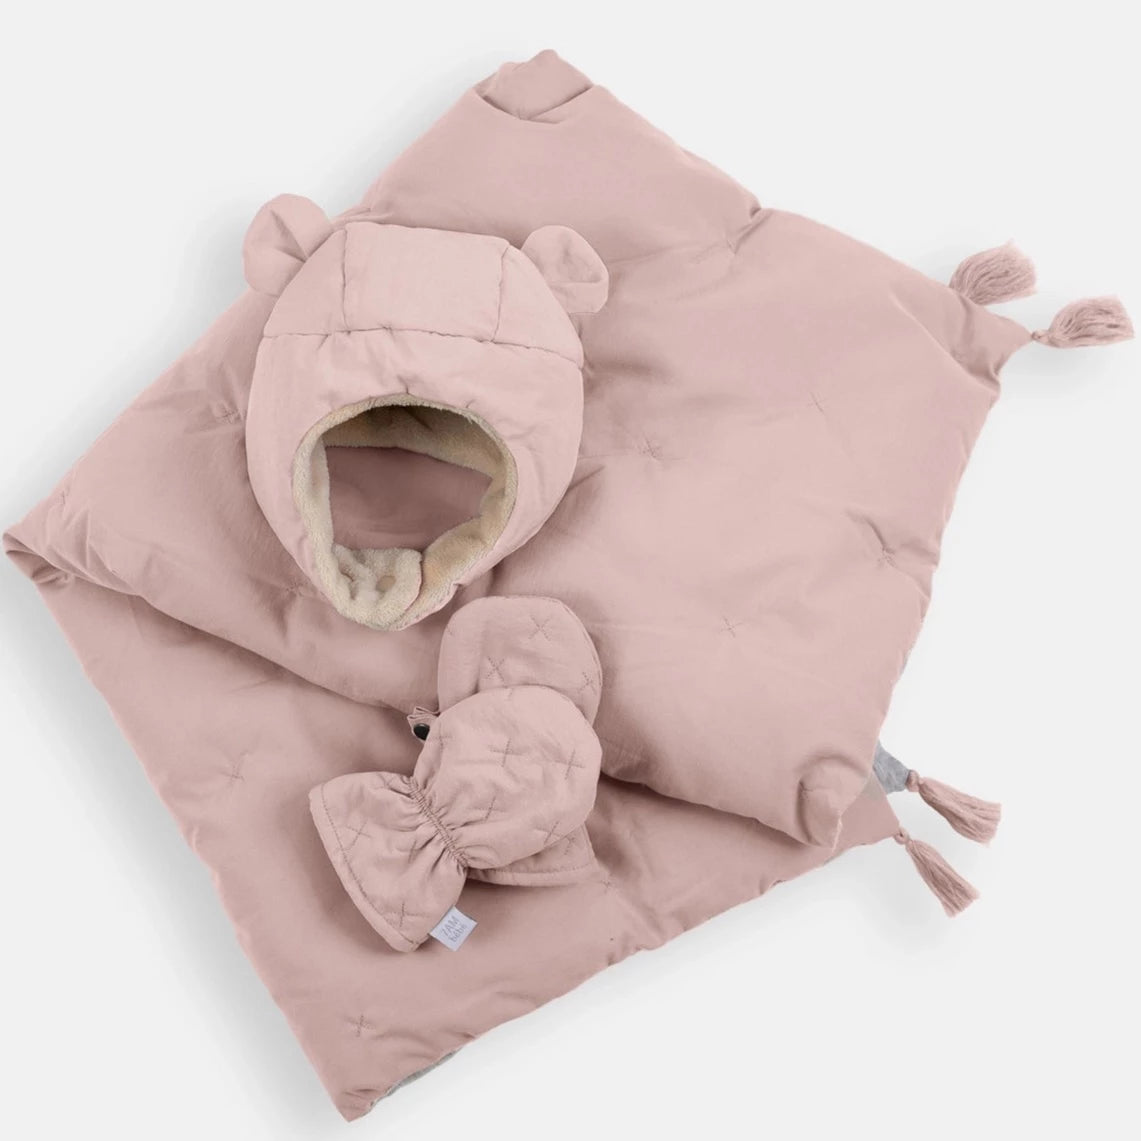 Cub Set - Airy | Mitten, Hat & Blanket - Cameo